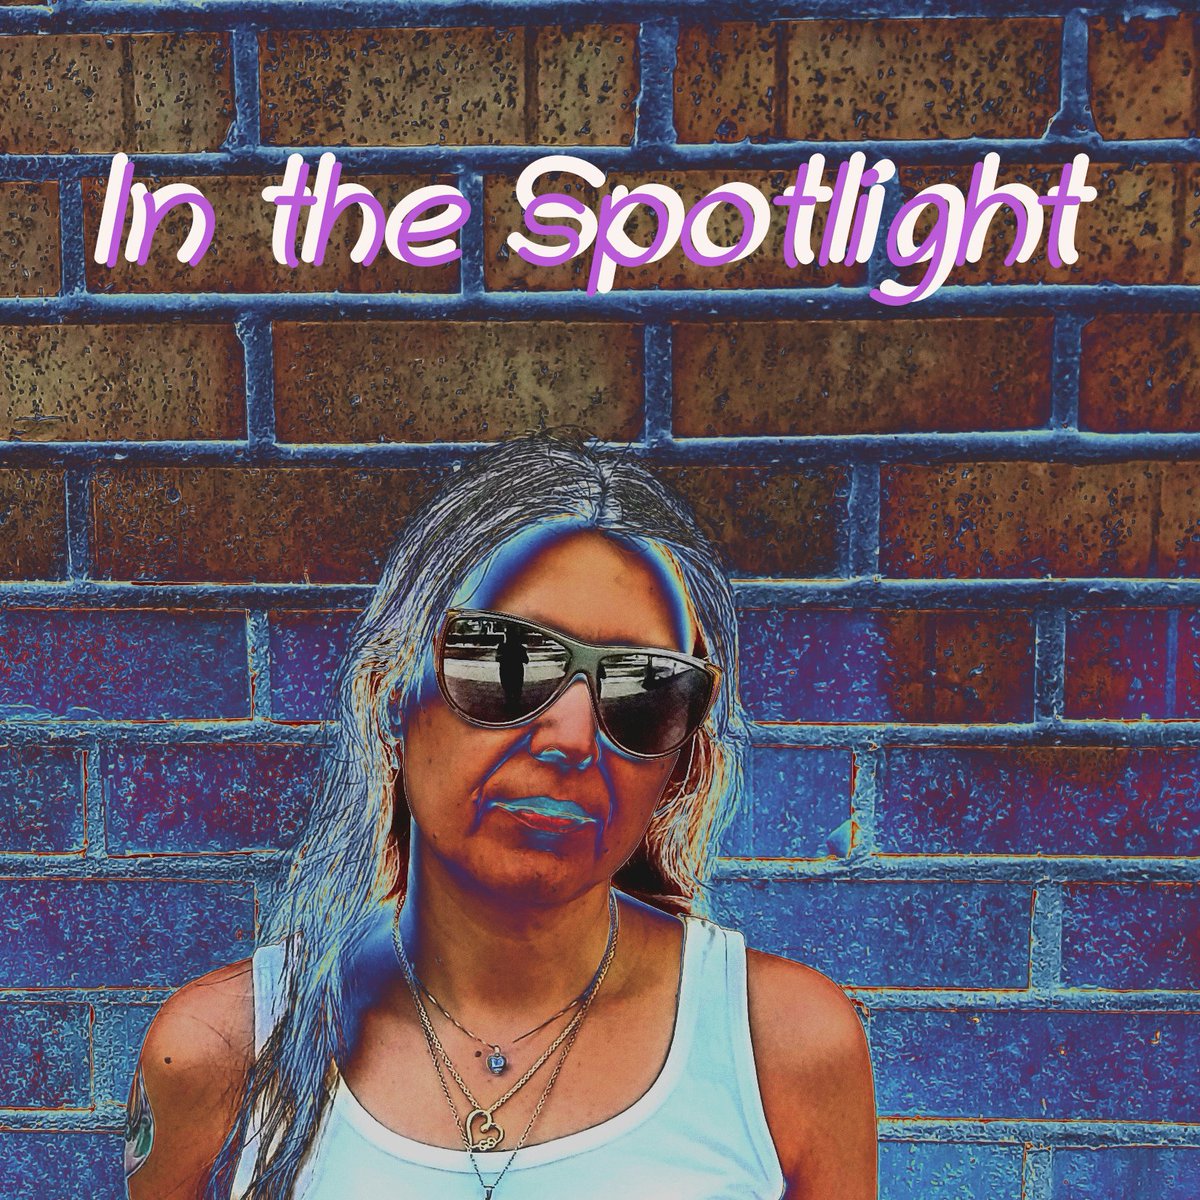 Hi everyone! It's been a while since I've did one of these.. but Here it is! a brand new 'In the Spotlight' and this time I was Lucky enough to have a chat with Paul Kaiser from the Amazing @KaiserCreation and YOU can read about it here creativereader.bloggplatsen.se